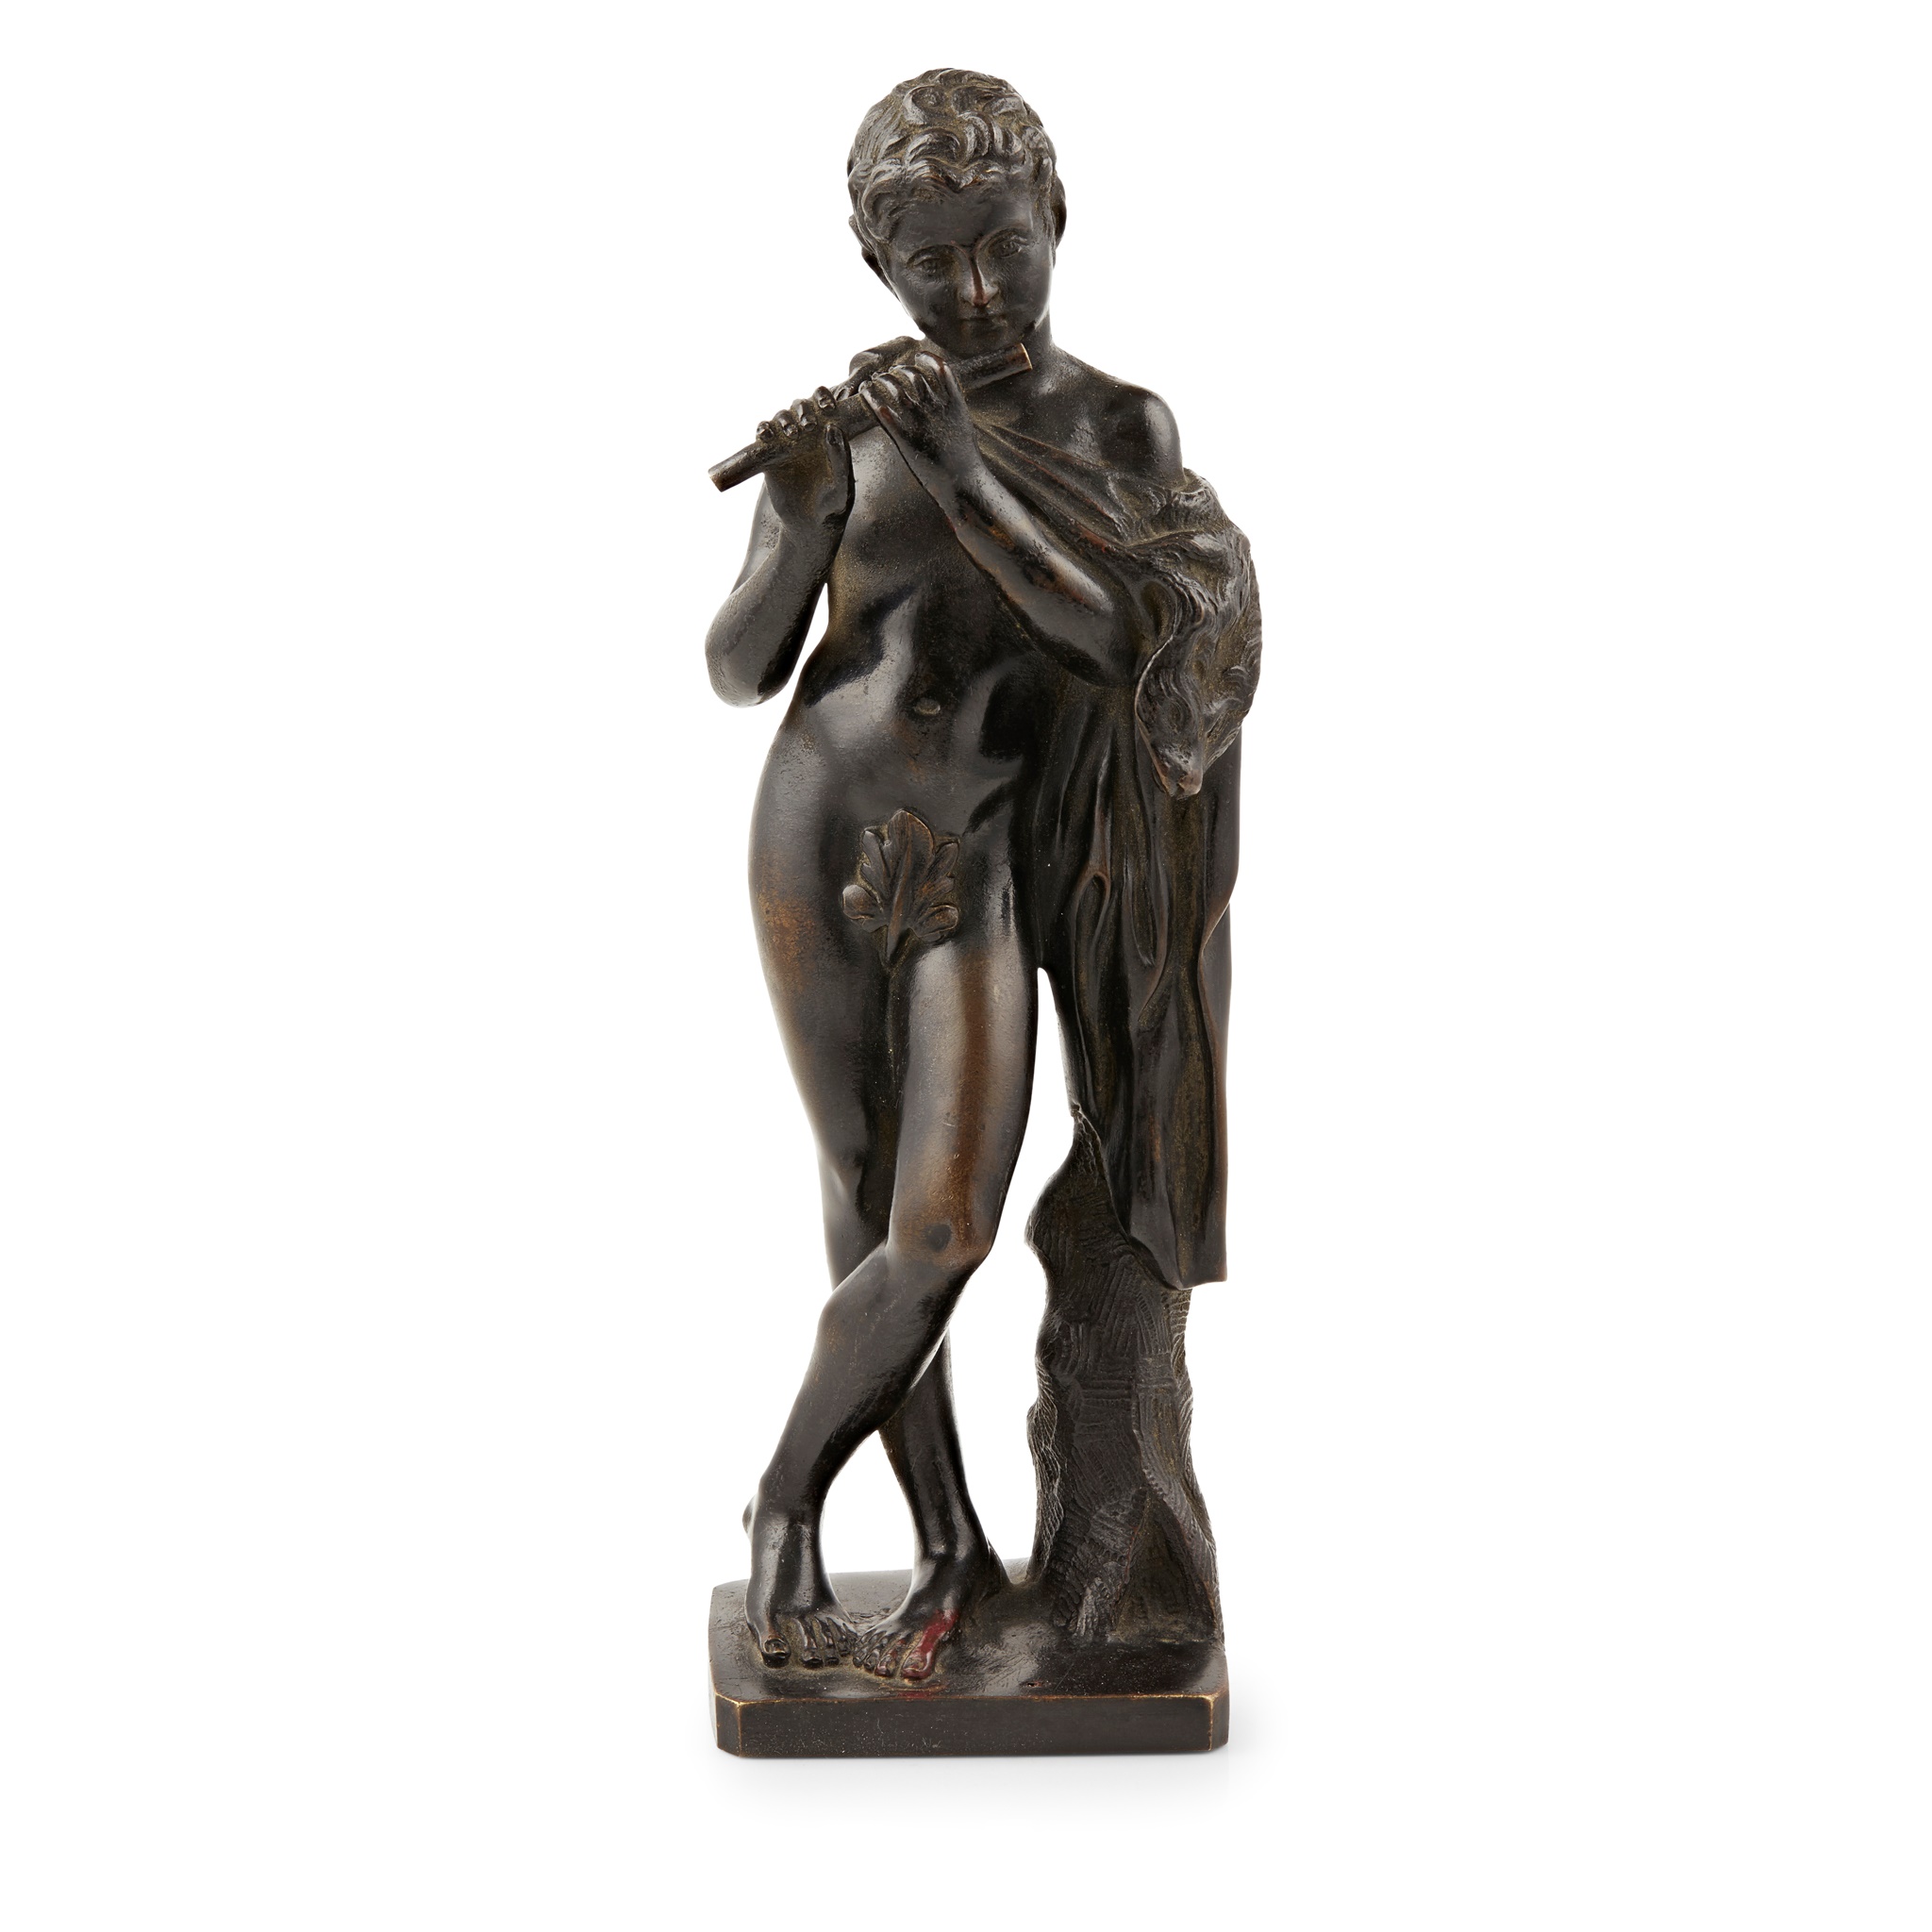 AFTER THE ANTIQUE, ITALIAN OR FRENCH BRONZE FIGURE OF A YOUNG SATYR PLAYING THE FLUTE 